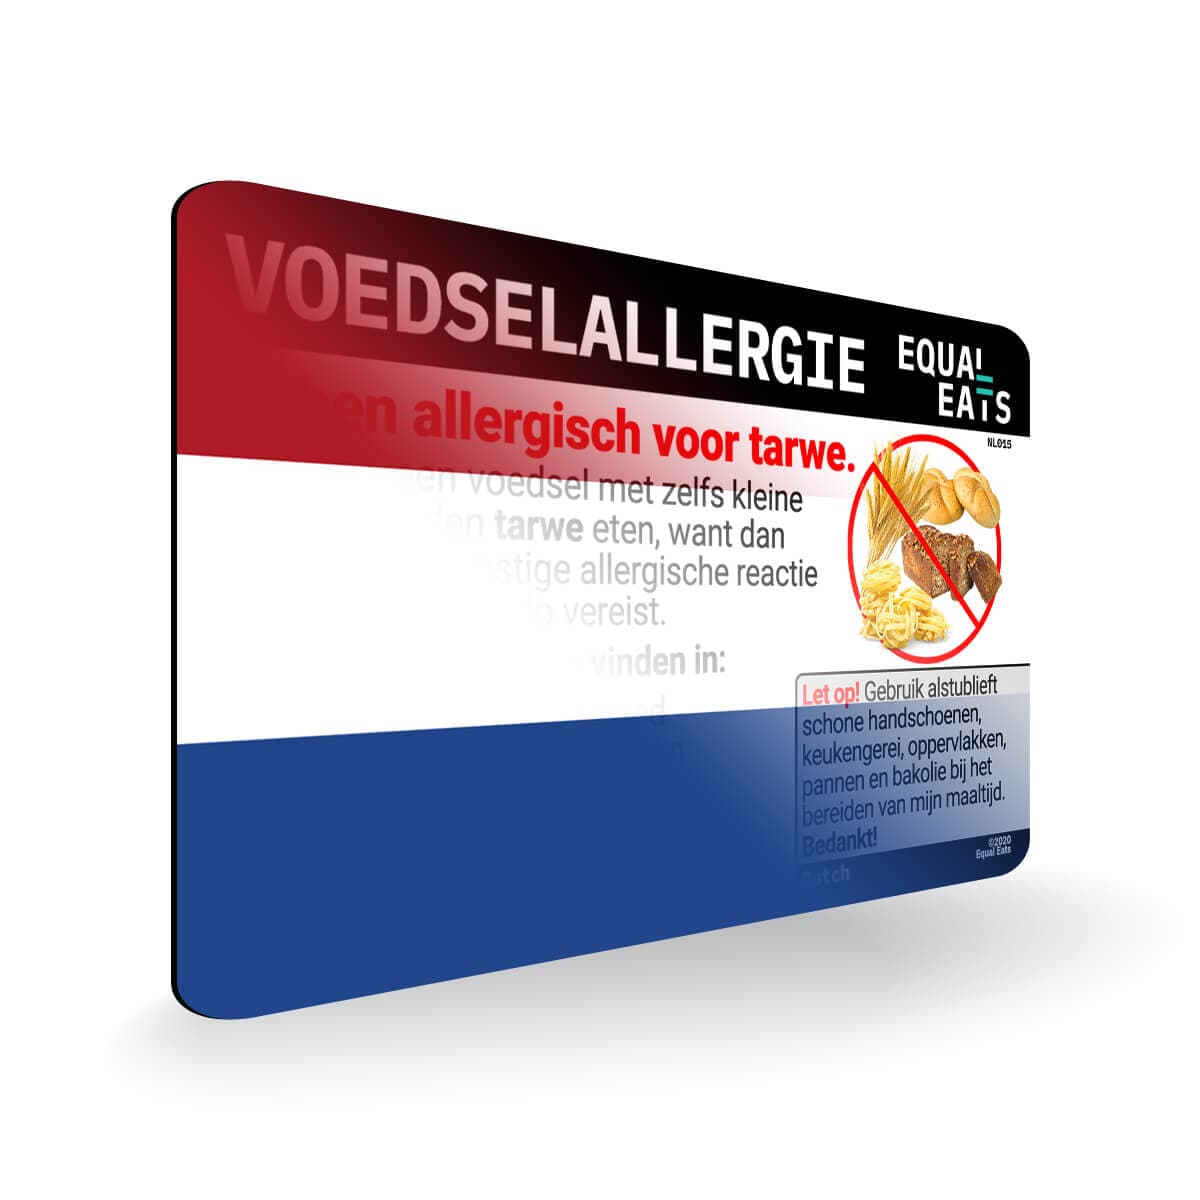 Wheat Allergy in Dutch. Wheat Allergy Card for Netherlands